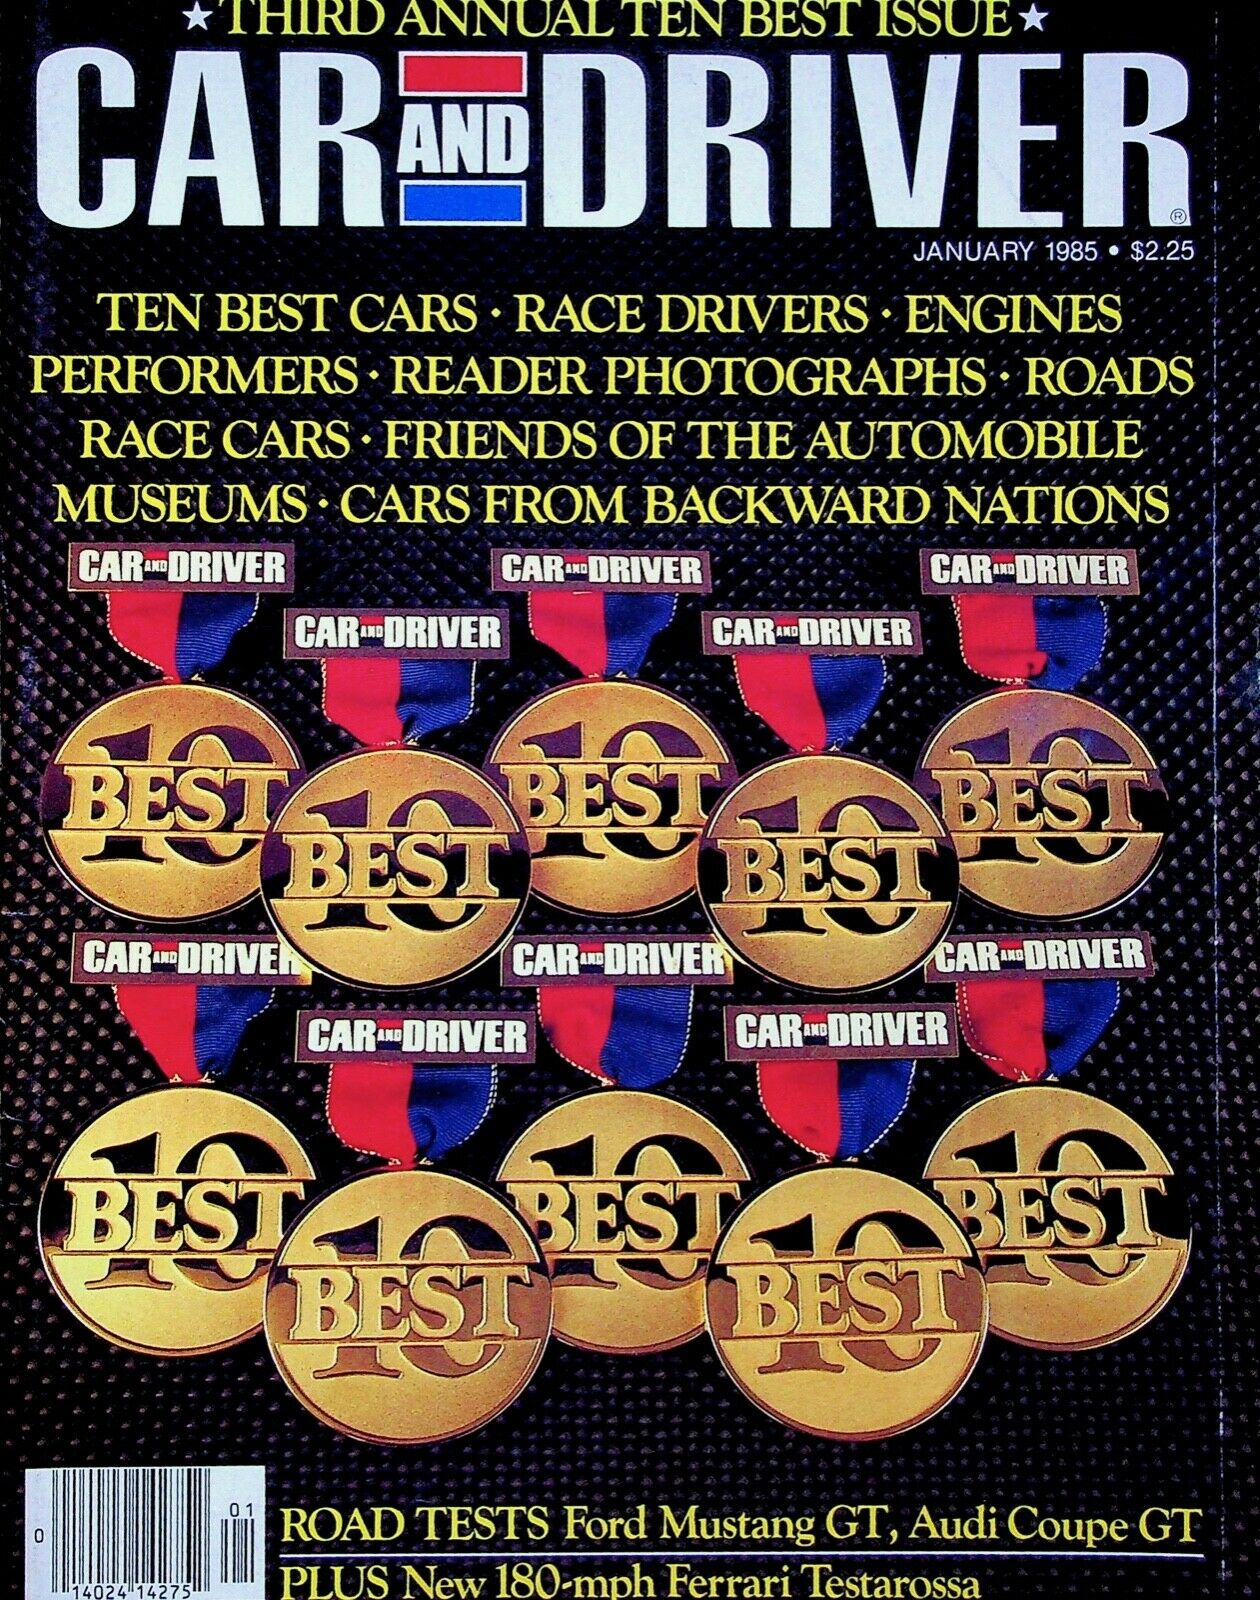 Car & Driver January 1985, , Third Annual Ten Best Issue